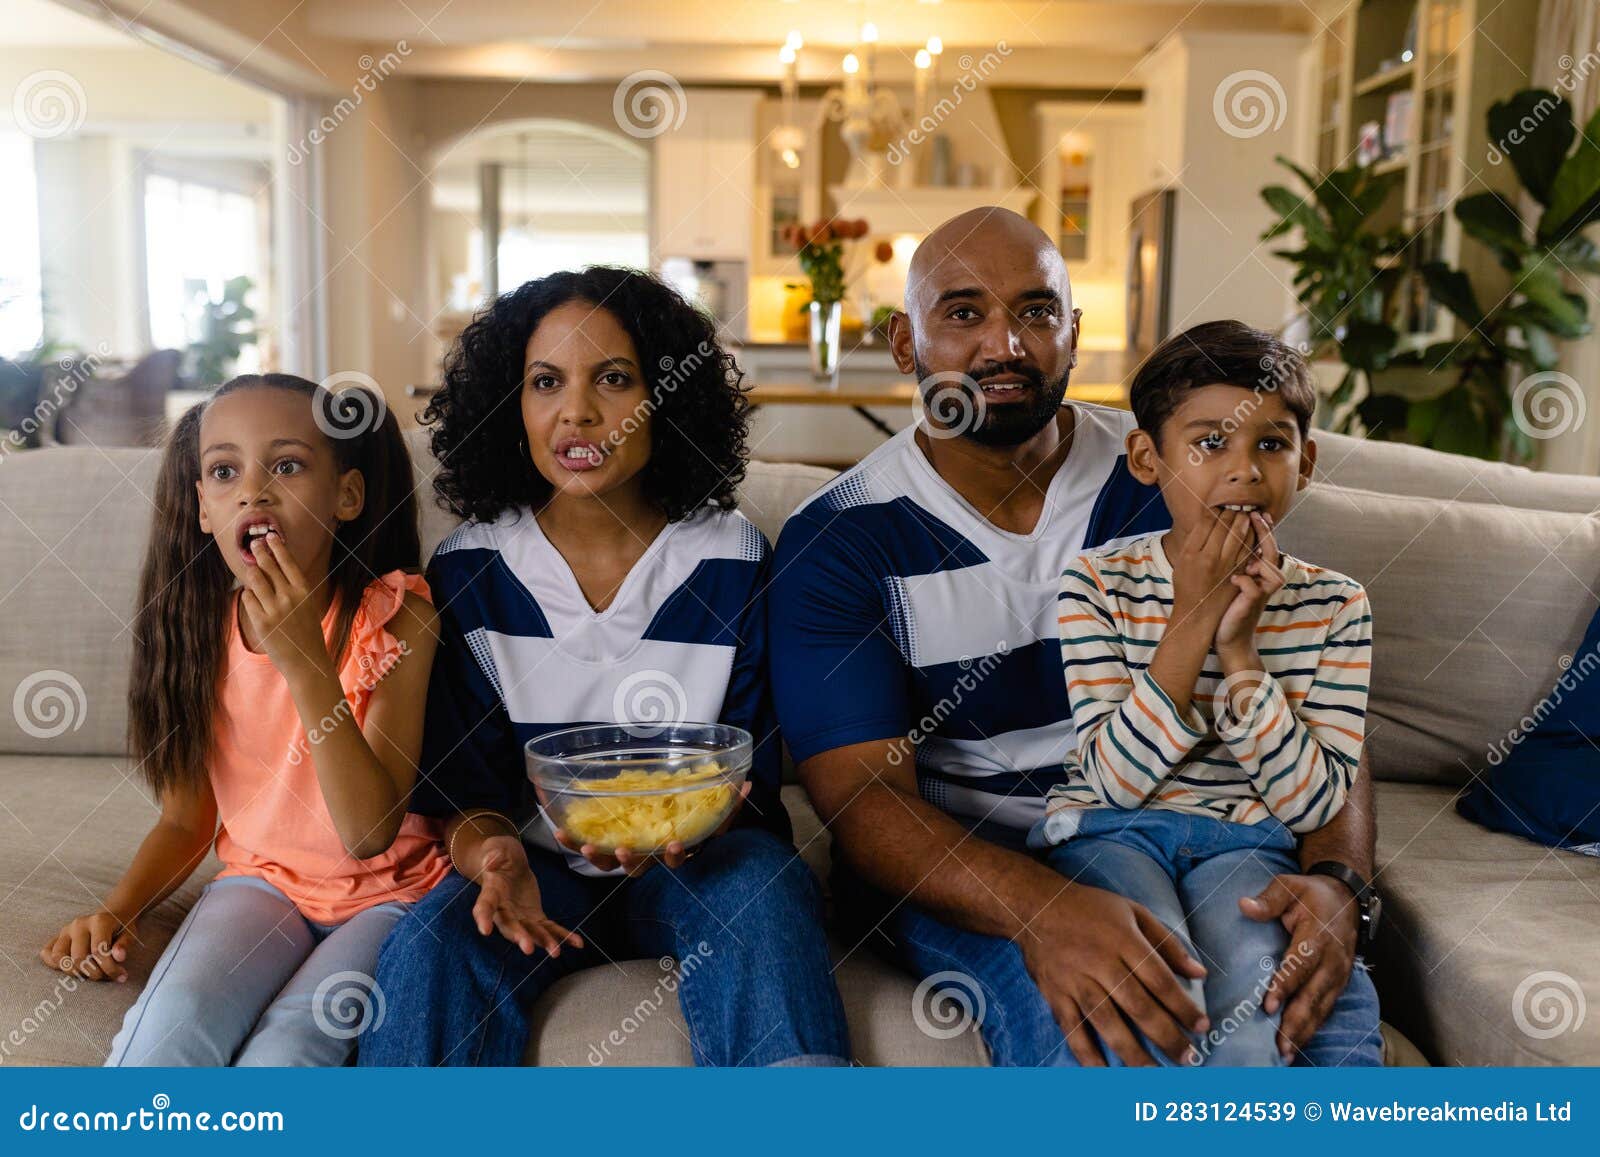 focussed biracial family sitting on couch eating snacks and watching tv